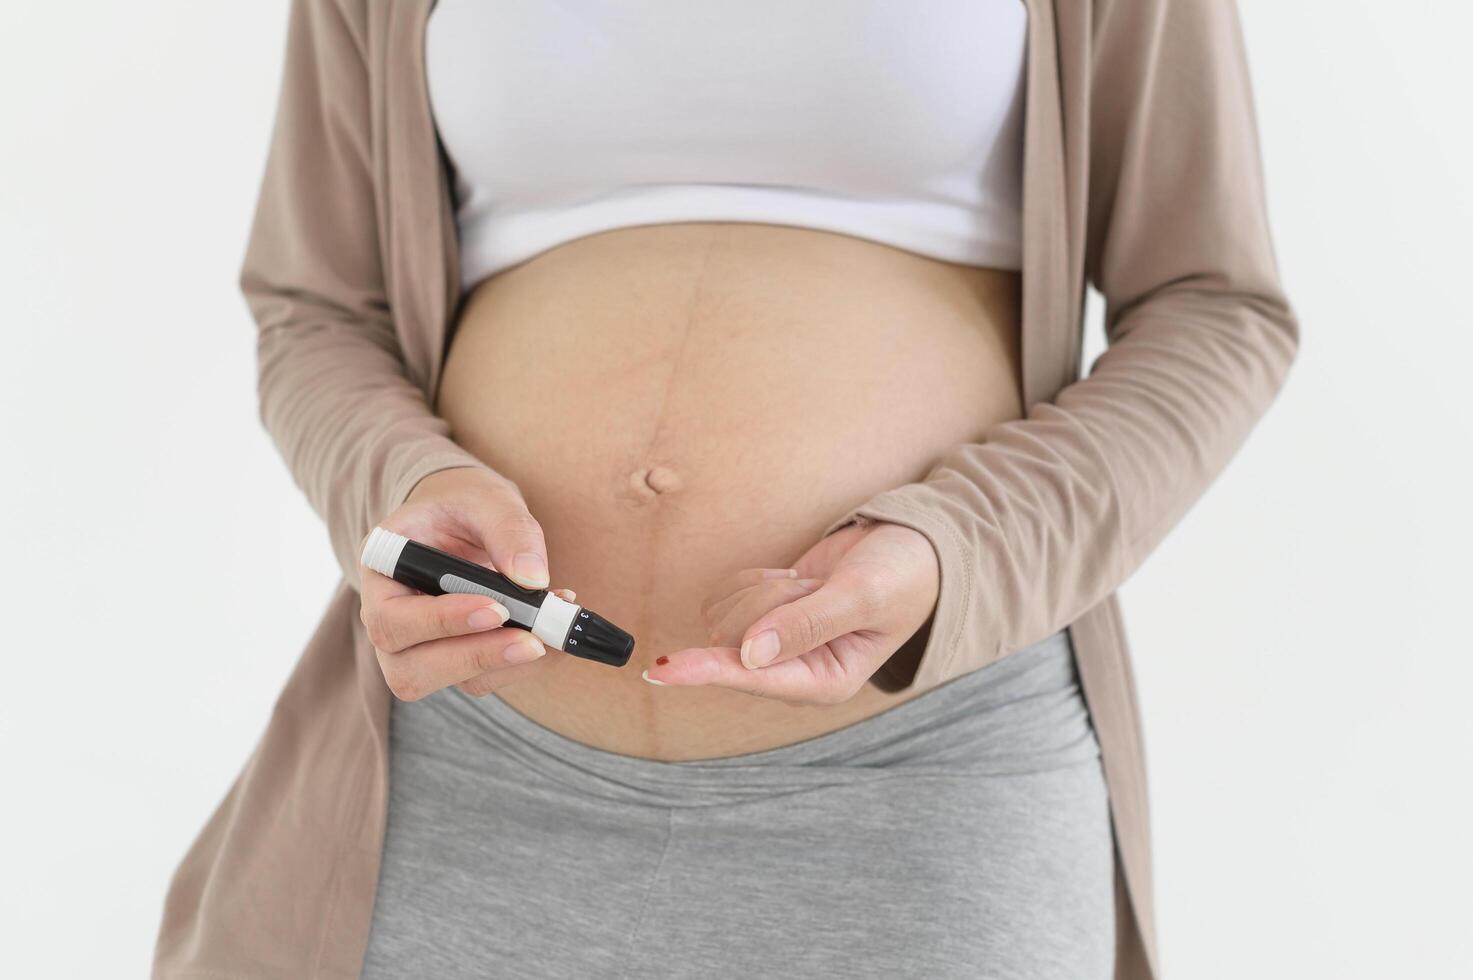 Pregnant woman checking blood sugar level by using Digital Glucose meter, health care, medicine, diabetes, glycemia concept photo